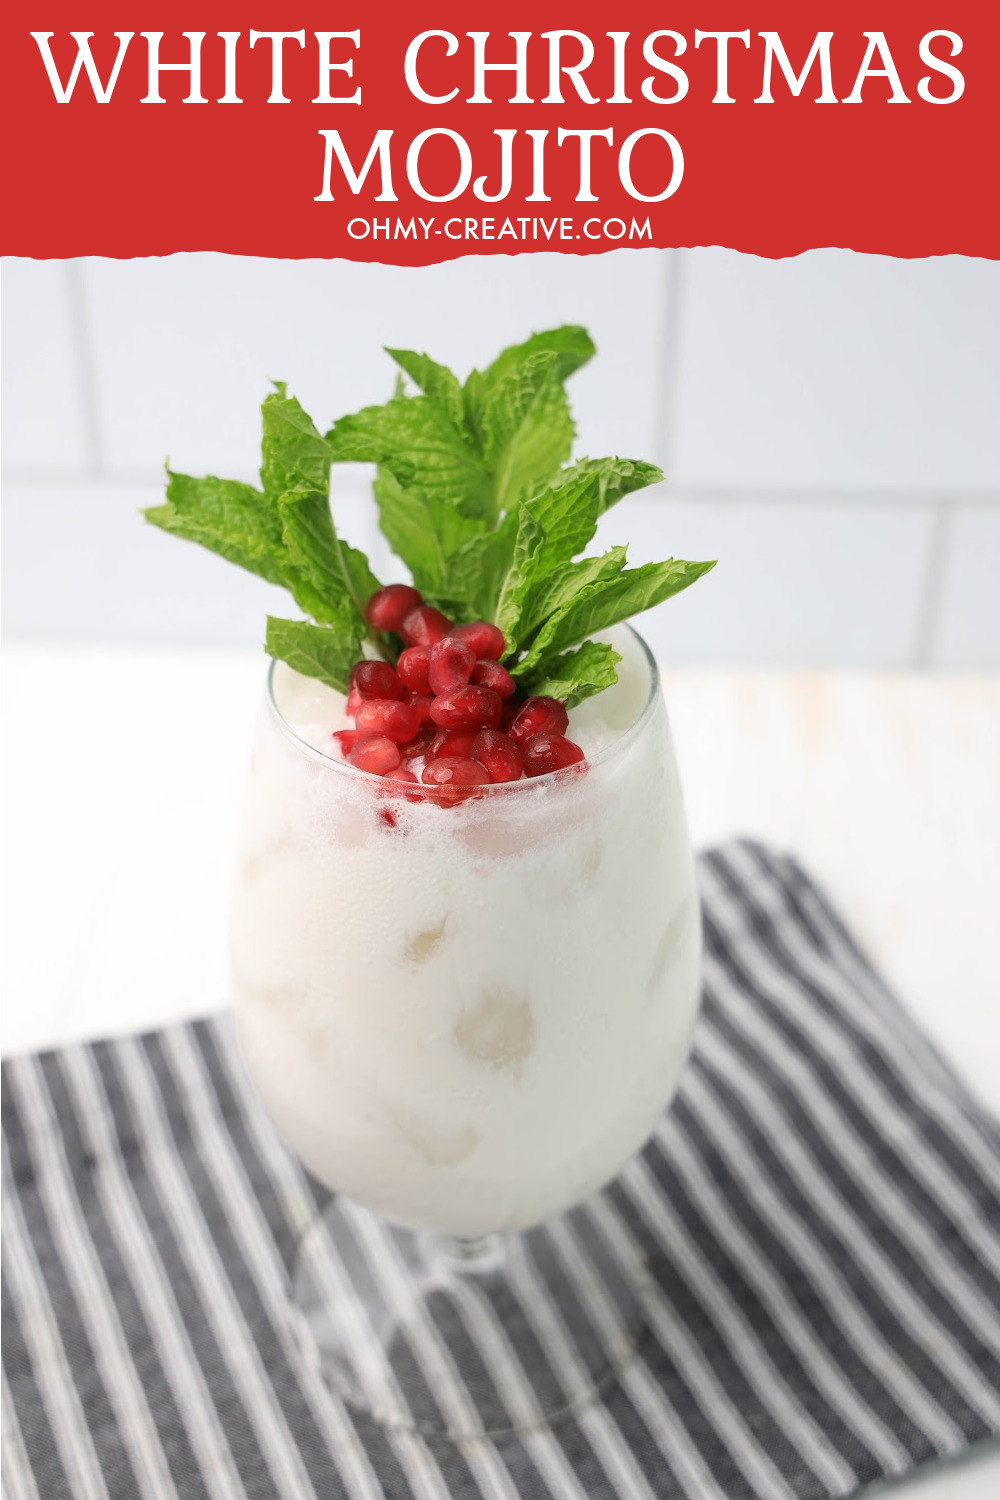 This pretty white Christmas mojito is topped with pomegranate arils and fresh mint. It sits on a black and white checked napkin on a white kitchen counter and backsplash.